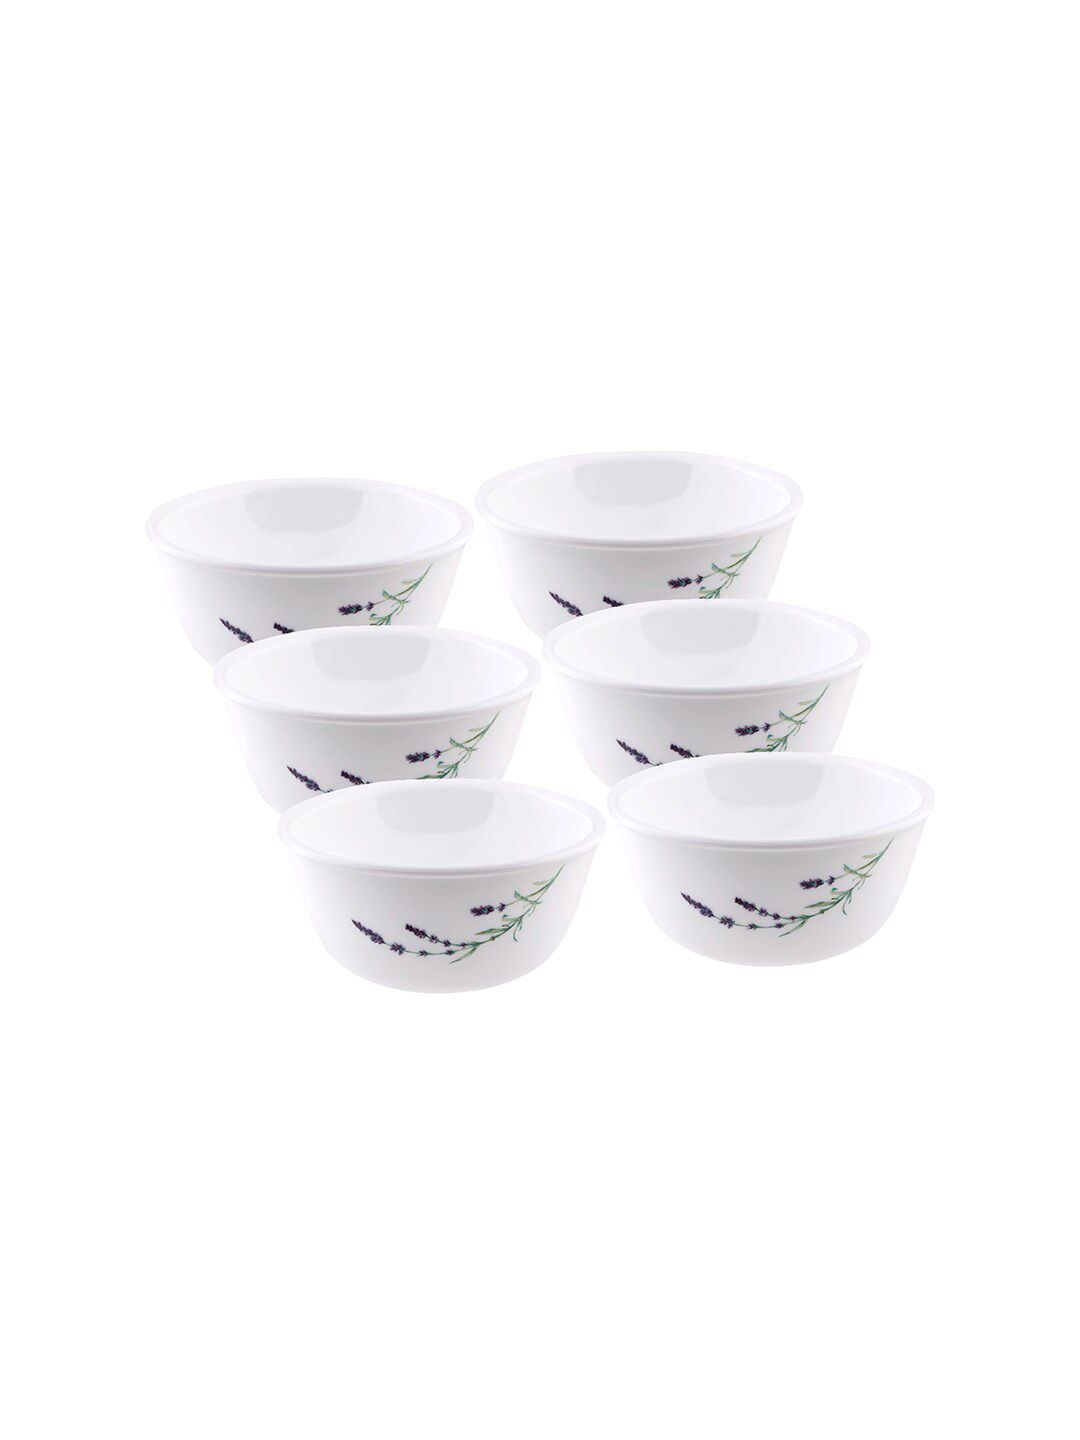 Corelle White & Green Set Of 6 Pieces Floral Printed Glossy Bowls Price in India